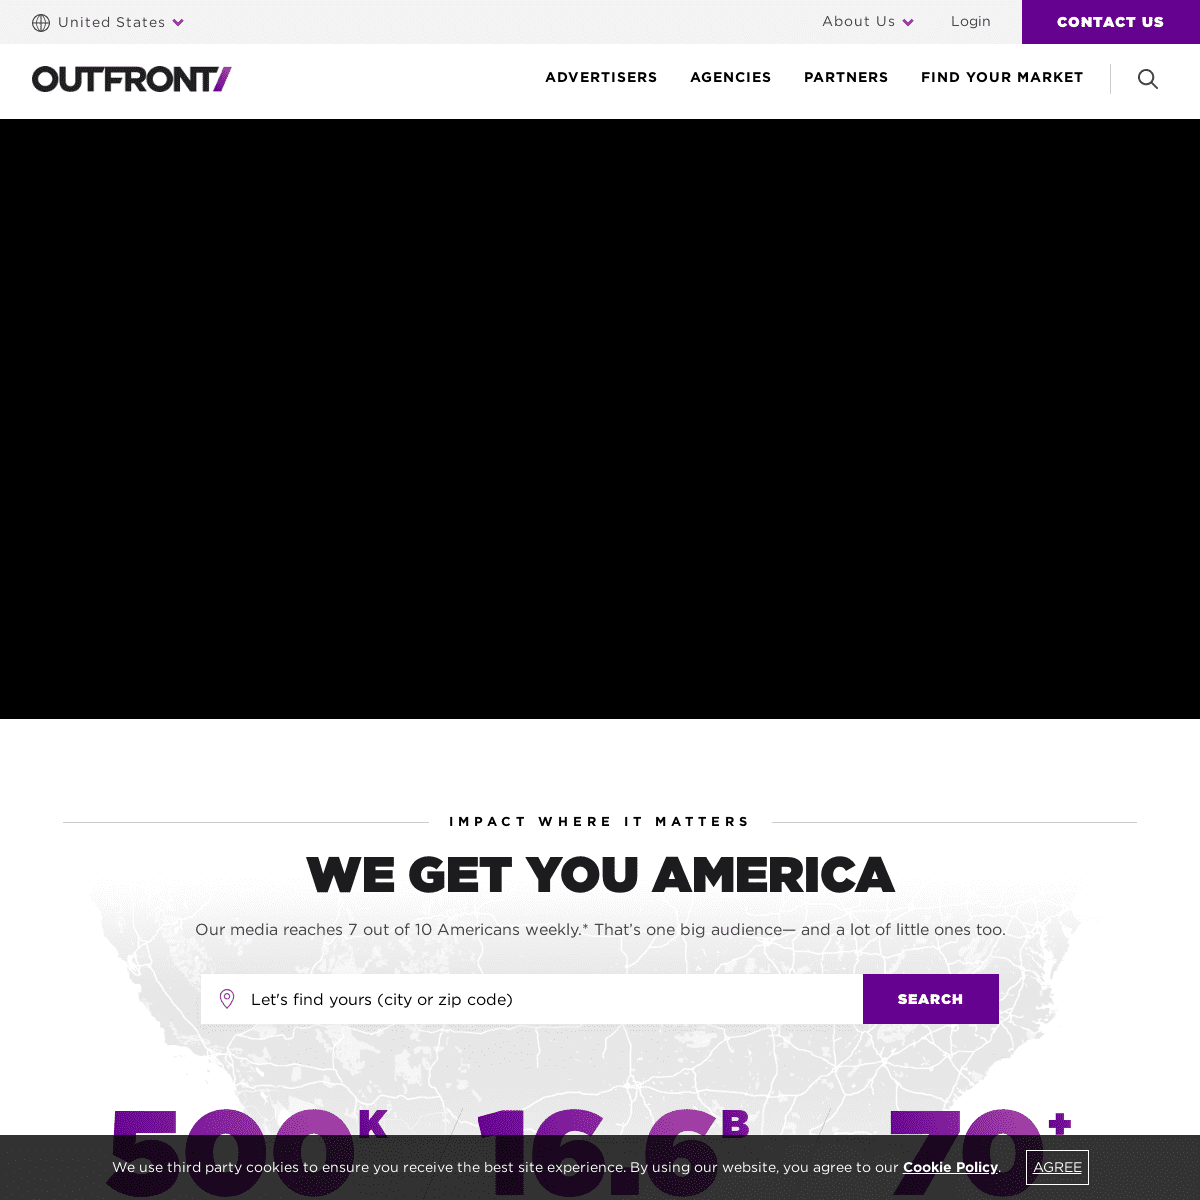 A complete backup of outfrontmedia.com